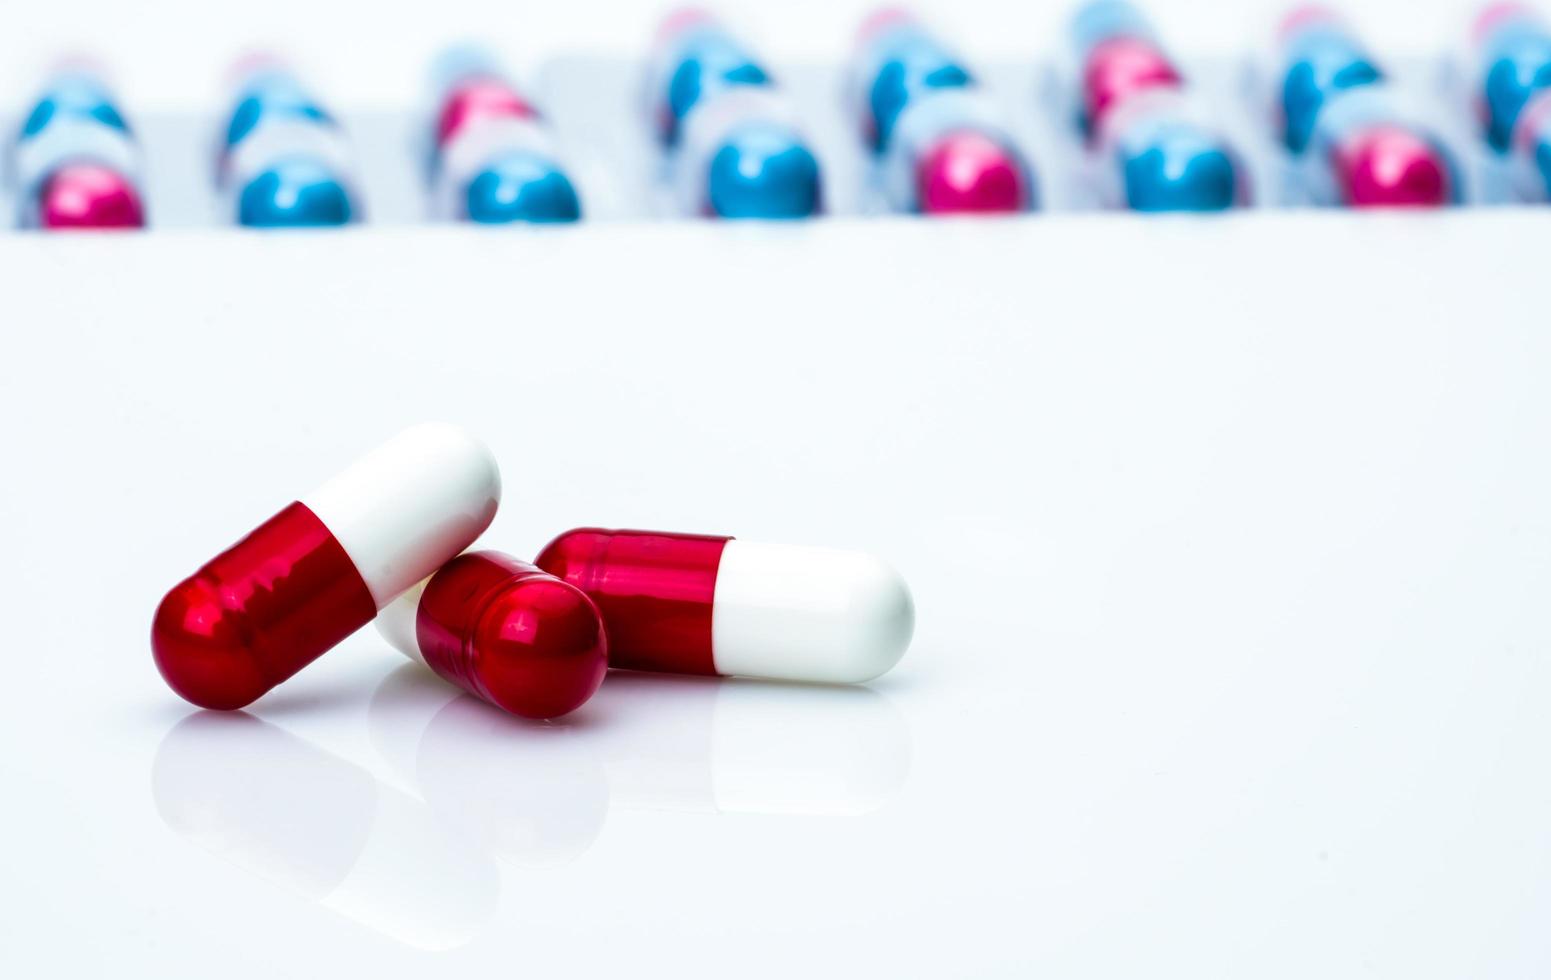 Red-white antibiotic capsule pills on pills pack blurred background with copy space for text. Antibiotics drug resistance and antimicrobial drug use with reasonable concept. Global healthcare. photo